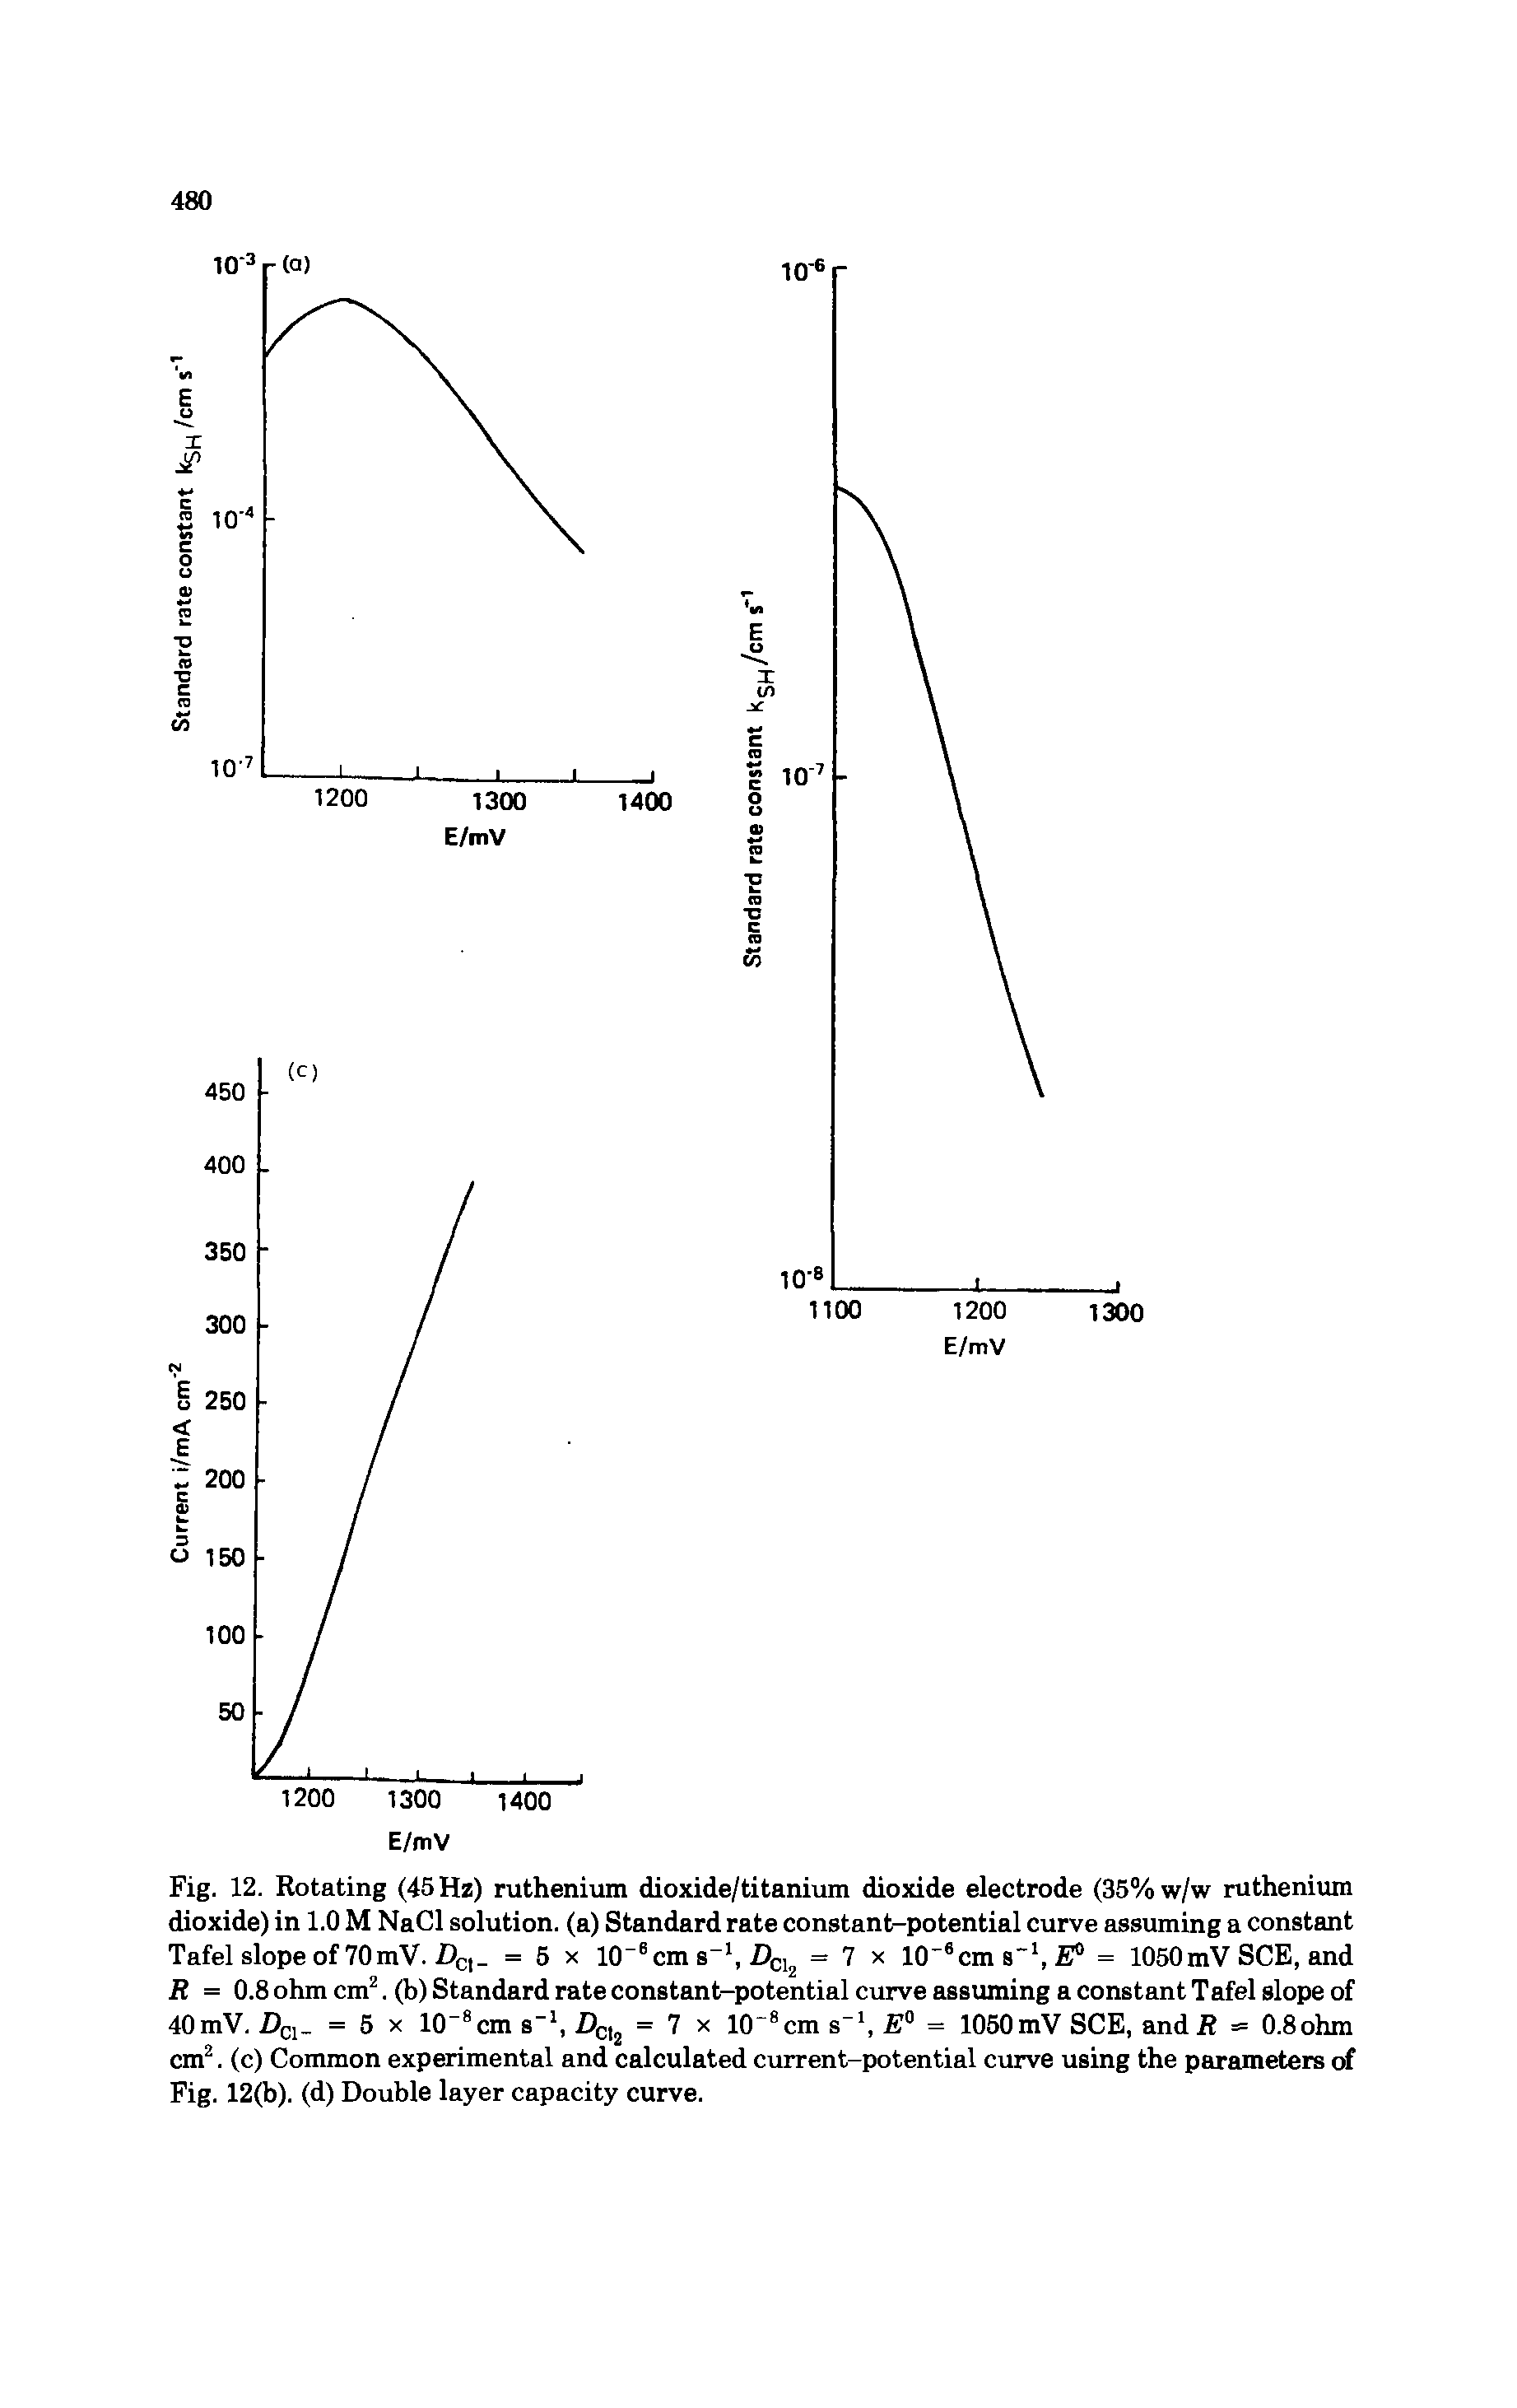 Fig. 12. Rotating (45 Hz) ruthenium dioxide/titanium dioxide electrode (35%w/w ruthenium dioxide) in 1.0 M NaCl solution, (a) Standard rate constant-potential curve assuming a constant Tafel slope of 70mV. Dcl = 5 x 10 6cm s-1, Dc = 7 x 10 6cm s-1, E° = 1050mV SCE, and R = 0.8 ohm cm2. (b) Standard rate constant-potential curve assuming a constant Tafel slope of 40mV. DC1 = 5 x 10 8cm s 1, Z)ct2 = 7 x 10 8cm s 1, E° = 1050mV SCE, and R = 0.8ohm cm2. (c) Common experimental and calculated current-potential curve using the parameters of Fig. 12(b). (d) Double layer capacity curve.